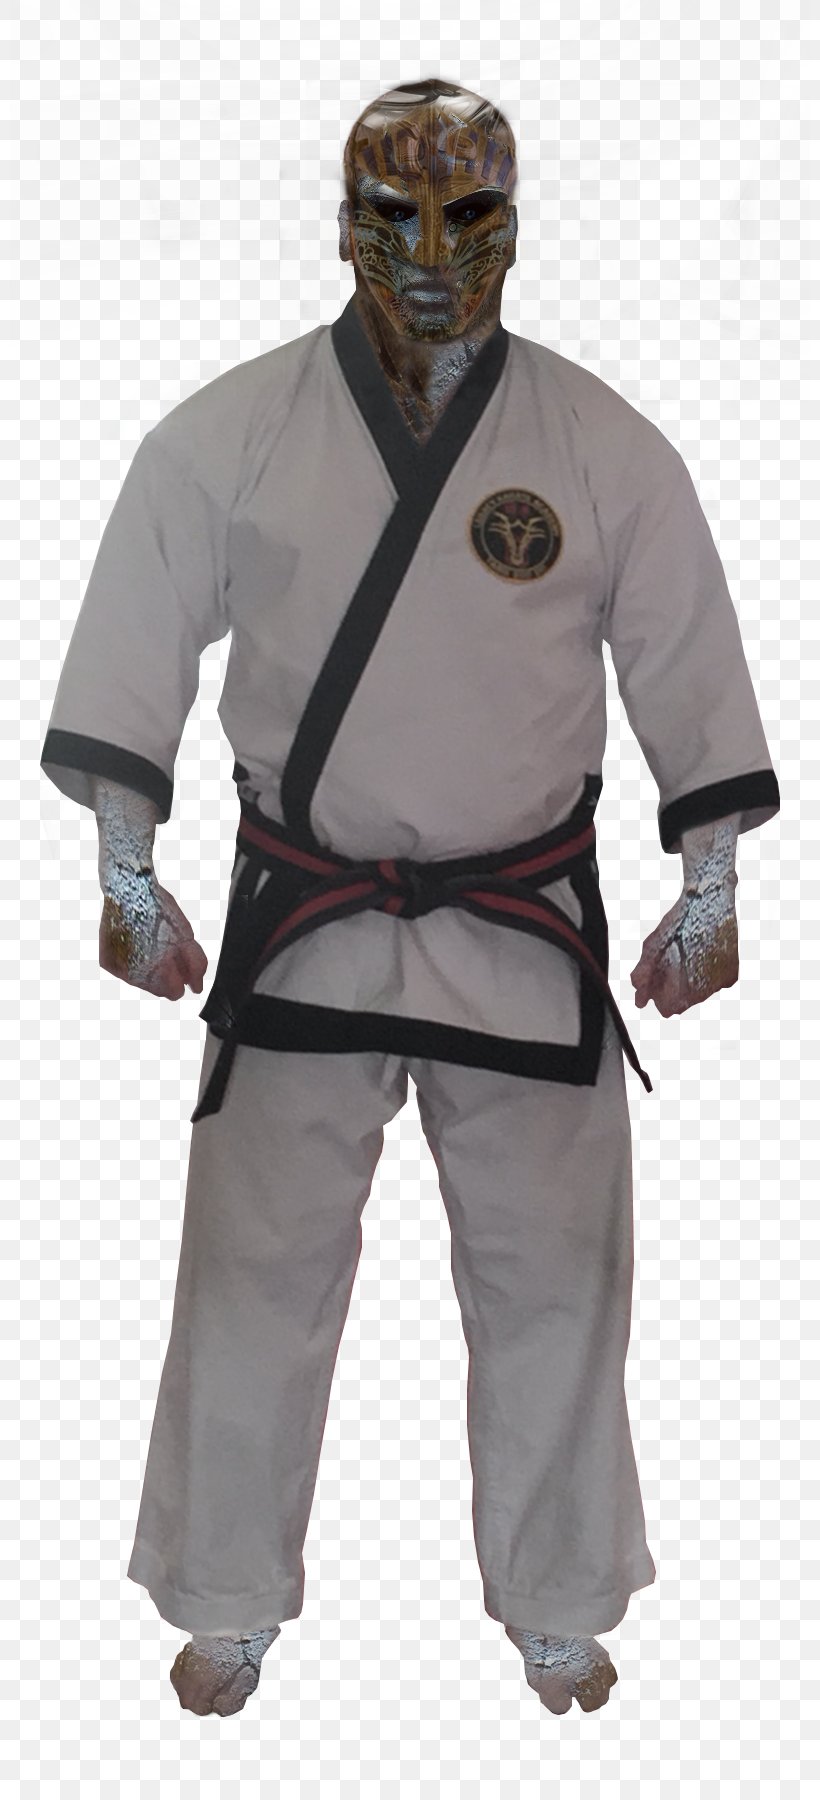 Costume, PNG, 800x1800px, Costume, Dobok, Outerwear Download Free